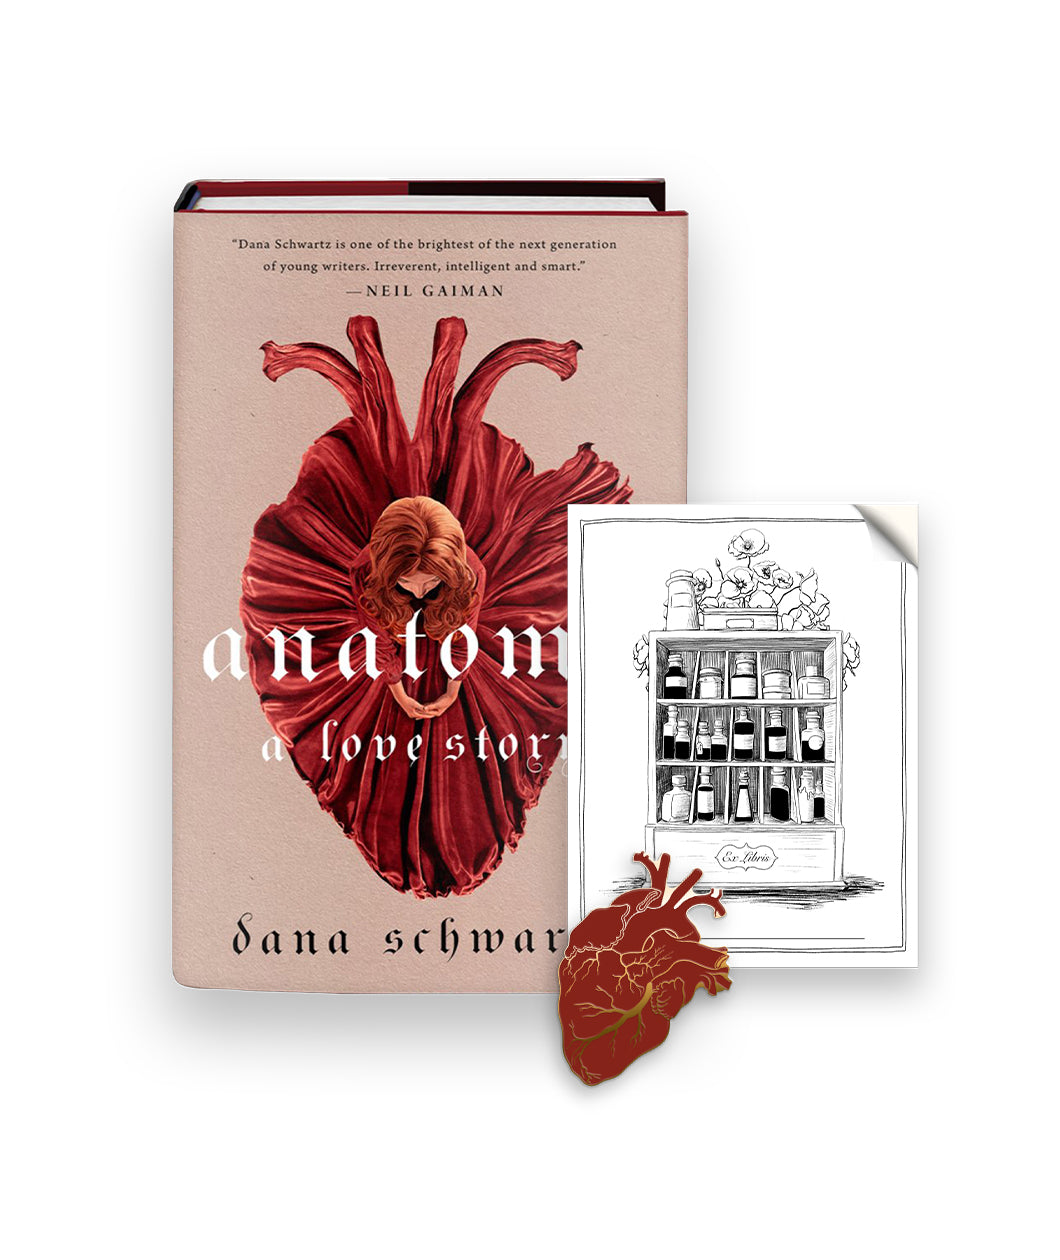  A Noble Blood Bundle featuring the book "Anatomy: A Love Story", a black and white bookplate sticker of a shelf with bottles on it, and a red and gold anatomical heart pin. 